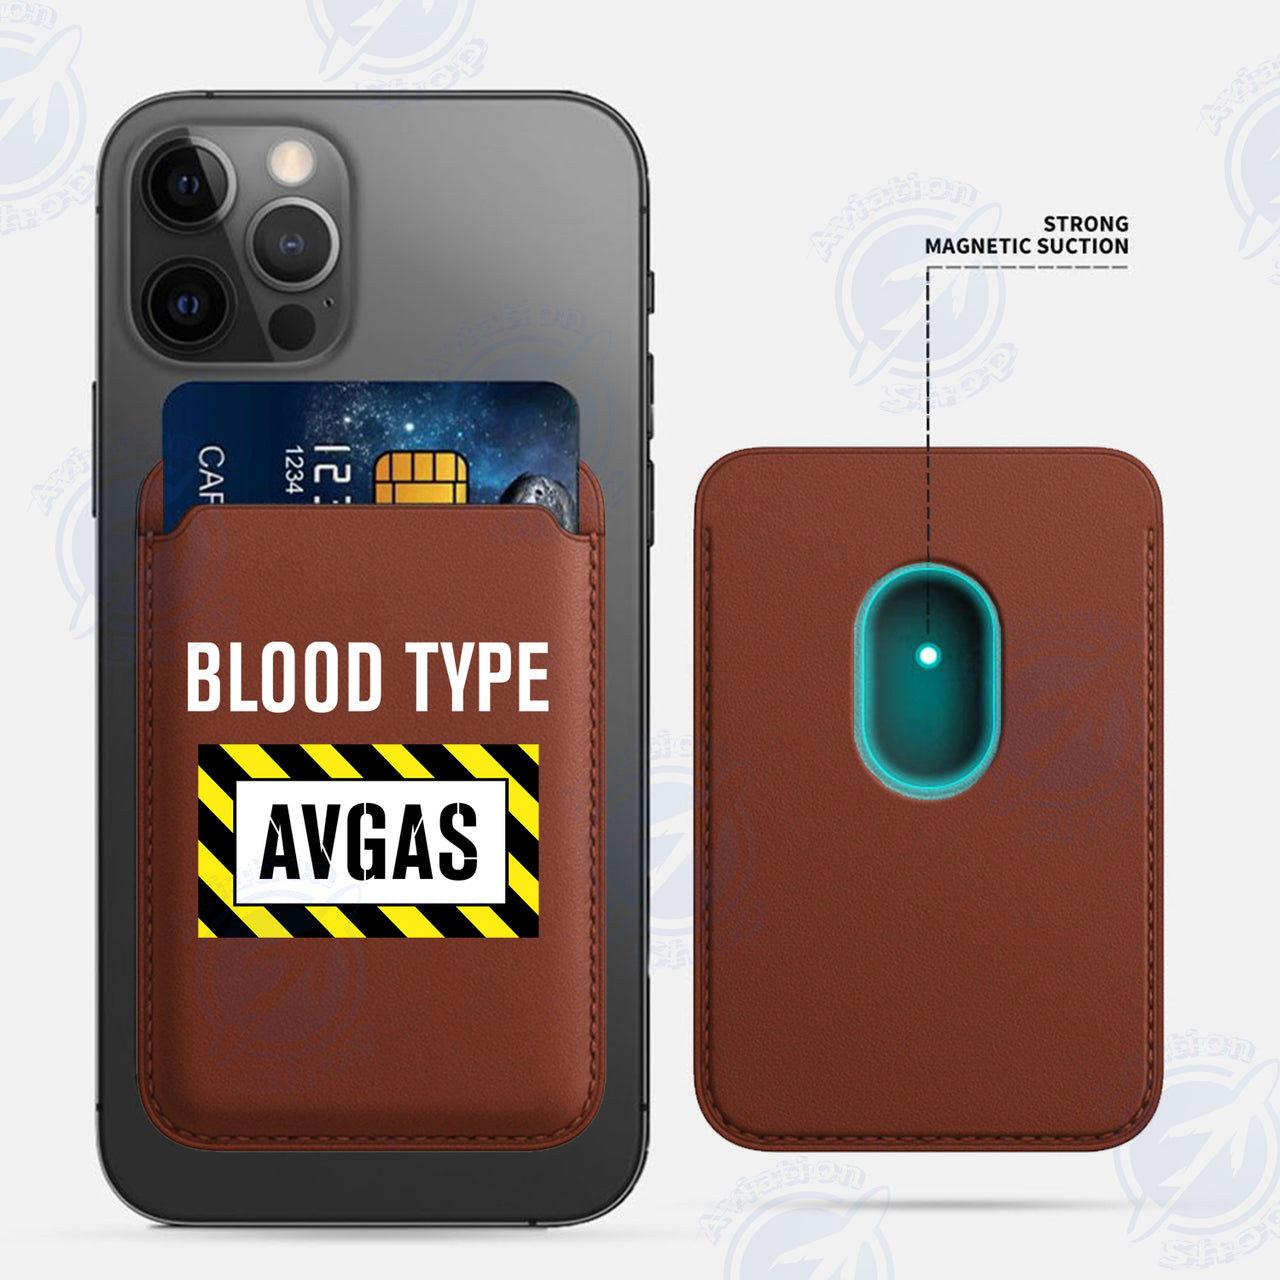 Blood Type AVGAS iPhone Cases Magnetic Card Wallet